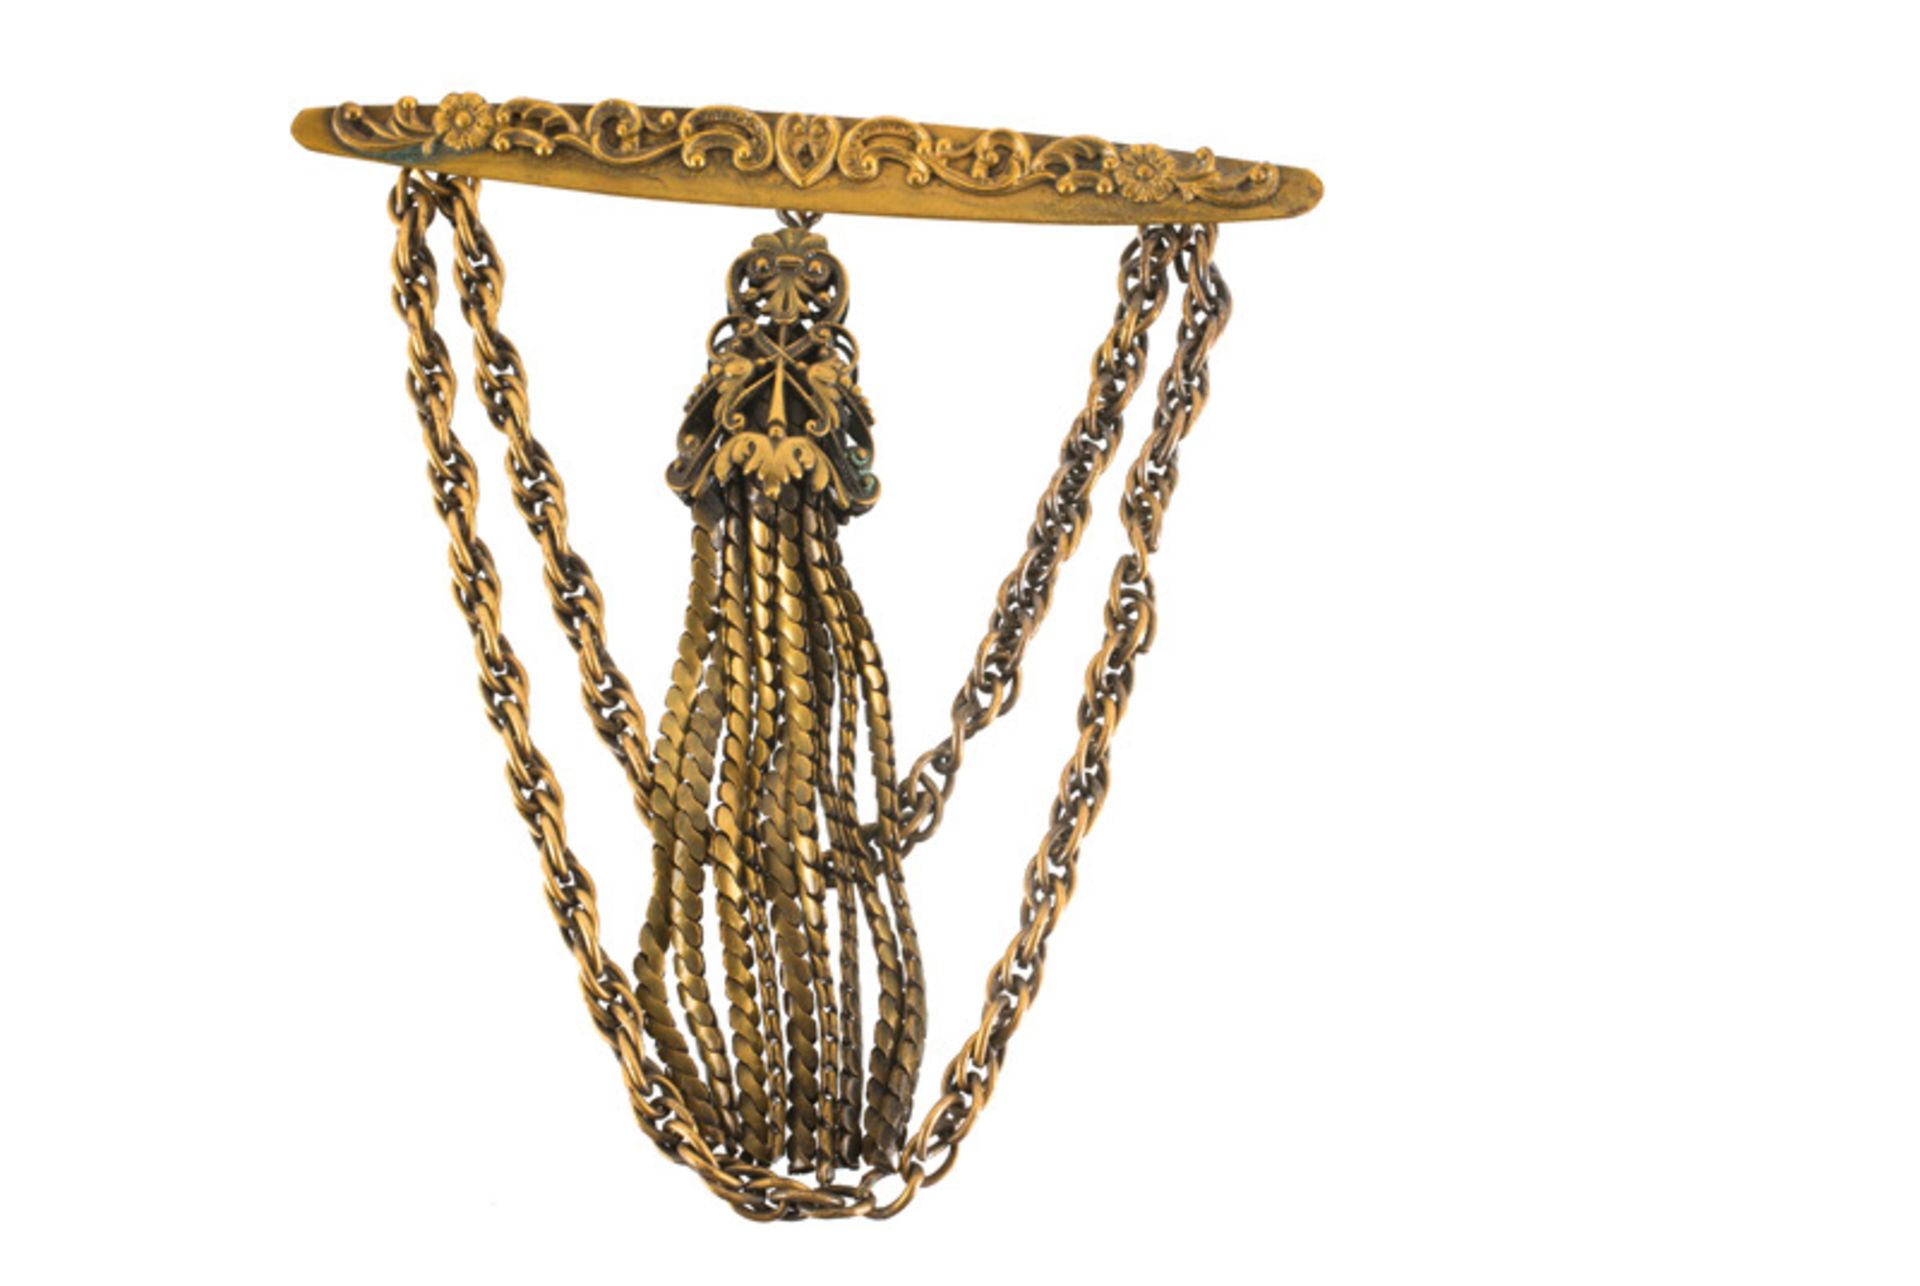 A Joseff Hollywood goldtone brooch with two chains and a pendant, decorated with scroll motifs.